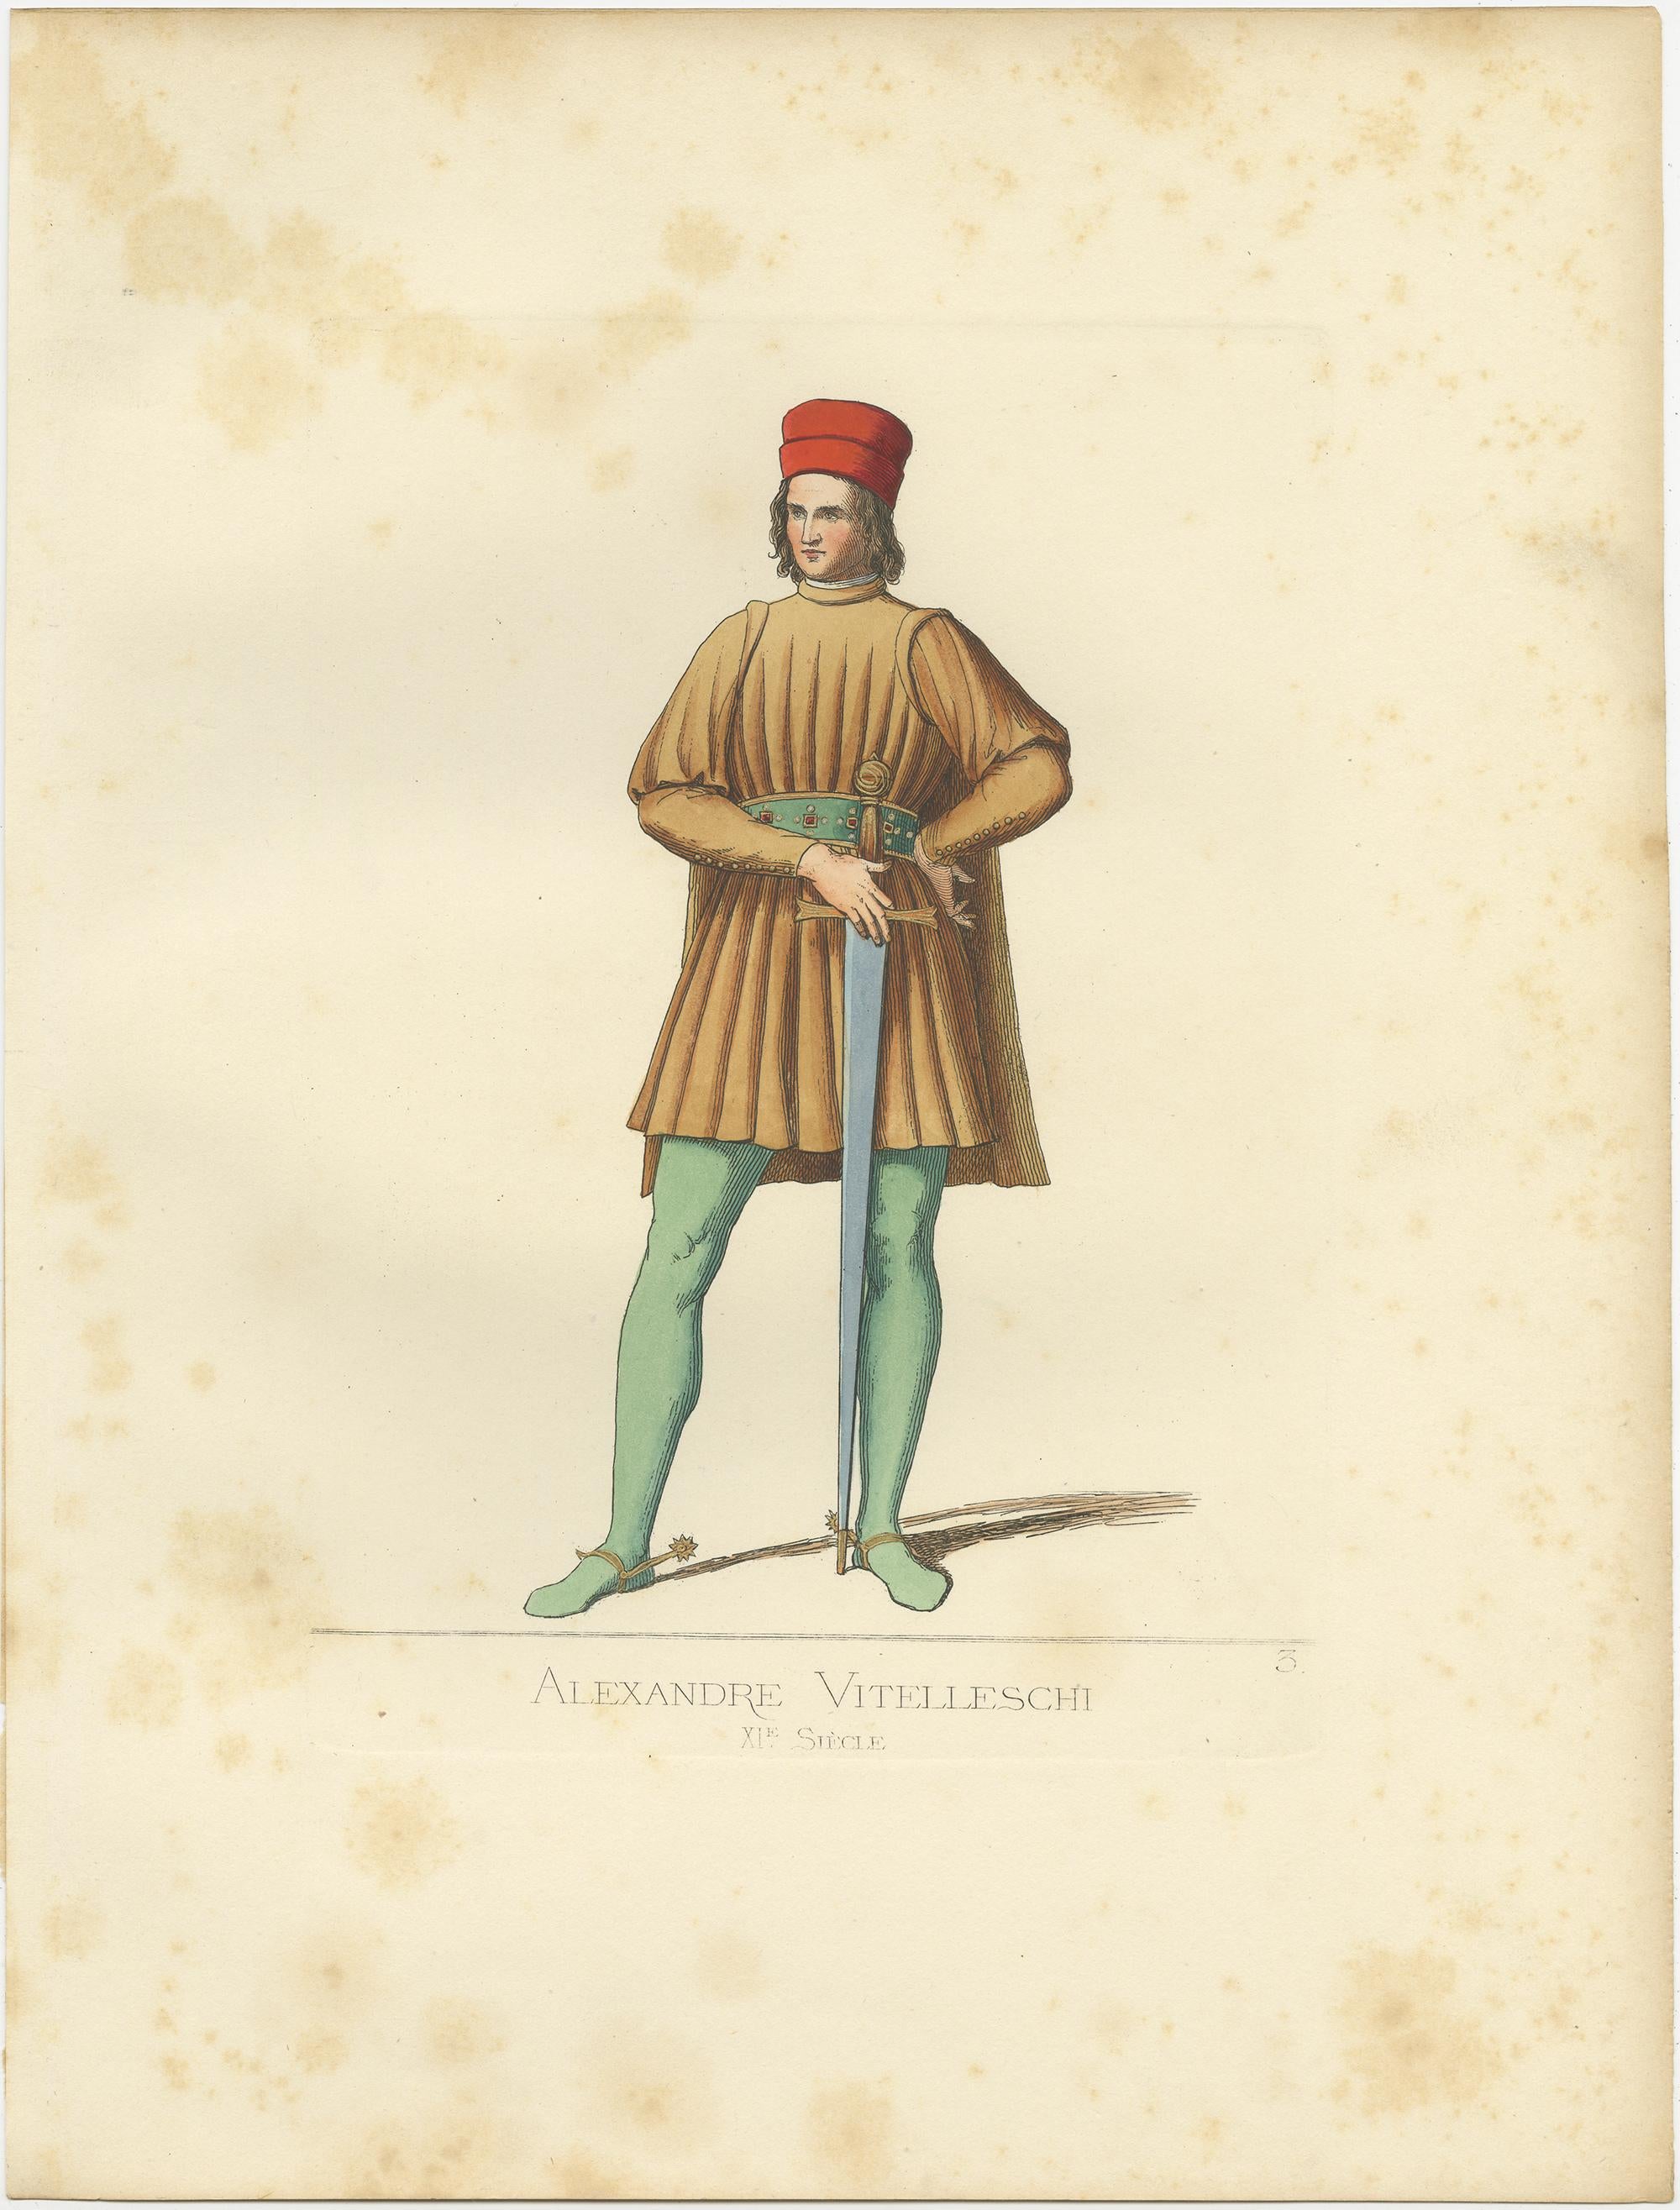 Antique print titled ‘Alexandre Vitelleschi', XIe Siecle.’ Original antique print of Alexandre Vitelleschi, imperial knight and count palatine, 11th century. This print originates from 'Costumes historiques de femmes du XIII, XIV et XV siècle' by C.